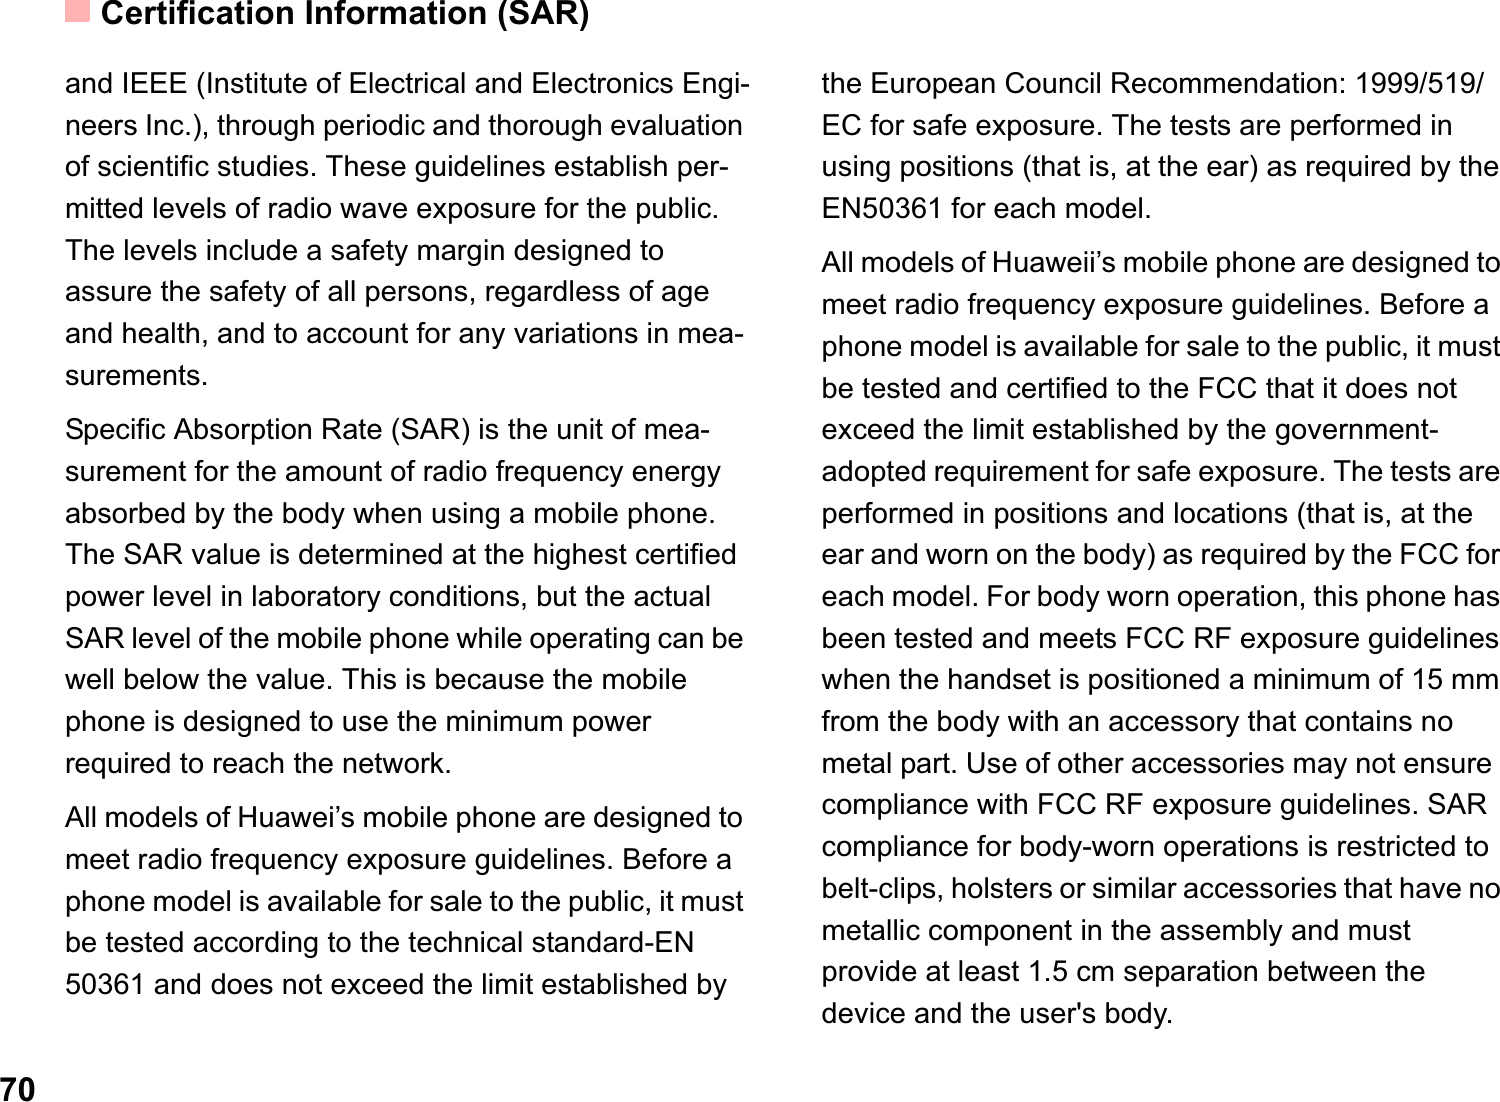 Certification Information (SAR)70and IEEE (Institute of Electrical and Electronics Engi-neers Inc.), through periodic and thorough evaluation of scientific studies. These guidelines establish per-mitted levels of radio wave exposure for the public. The levels include a safety margin designed to assure the safety of all persons, regardless of age and health, and to account for any variations in mea-surements.Specific Absorption Rate (SAR) is the unit of mea-surement for the amount of radio frequency energy absorbed by the body when using a mobile phone. The SAR value is determined at the highest certified power level in laboratory conditions, but the actual SAR level of the mobile phone while operating can be well below the value. This is because the mobile phone is designed to use the minimum power required to reach the network.All models of Huawei’s mobile phone are designed to meet radio frequency exposure guidelines. Before a phone model is available for sale to the public, it must be tested according to the technical standard-EN 50361 and does not exceed the limit established by the European Council Recommendation: 1999/519/EC for safe exposure. The tests are performed in using positions (that is, at the ear) as required by the EN50361 for each model.All models of Huaweii’s mobile phone are designed to meet radio frequency exposure guidelines. Before a phone model is available for sale to the public, it must be tested and certified to the FCC that it does not exceed the limit established by the government-adopted requirement for safe exposure. The tests are performed in positions and locations (that is, at the ear and worn on the body) as required by the FCC for each model. For body worn operation, this phone has been tested and meets FCC RF exposure guidelines when the handset is positioned a minimum of 15 mm from the body with an accessory that contains no metal part. Use of other accessories may not ensure  compliance with FCC RF exposure guidelines. SAR compliance for body-worn operations is restricted to belt-clips, holsters or similar accessories that have no metallic component in the assembly and must provide at least 1.5 cm separation between the device and the user&apos;s body.